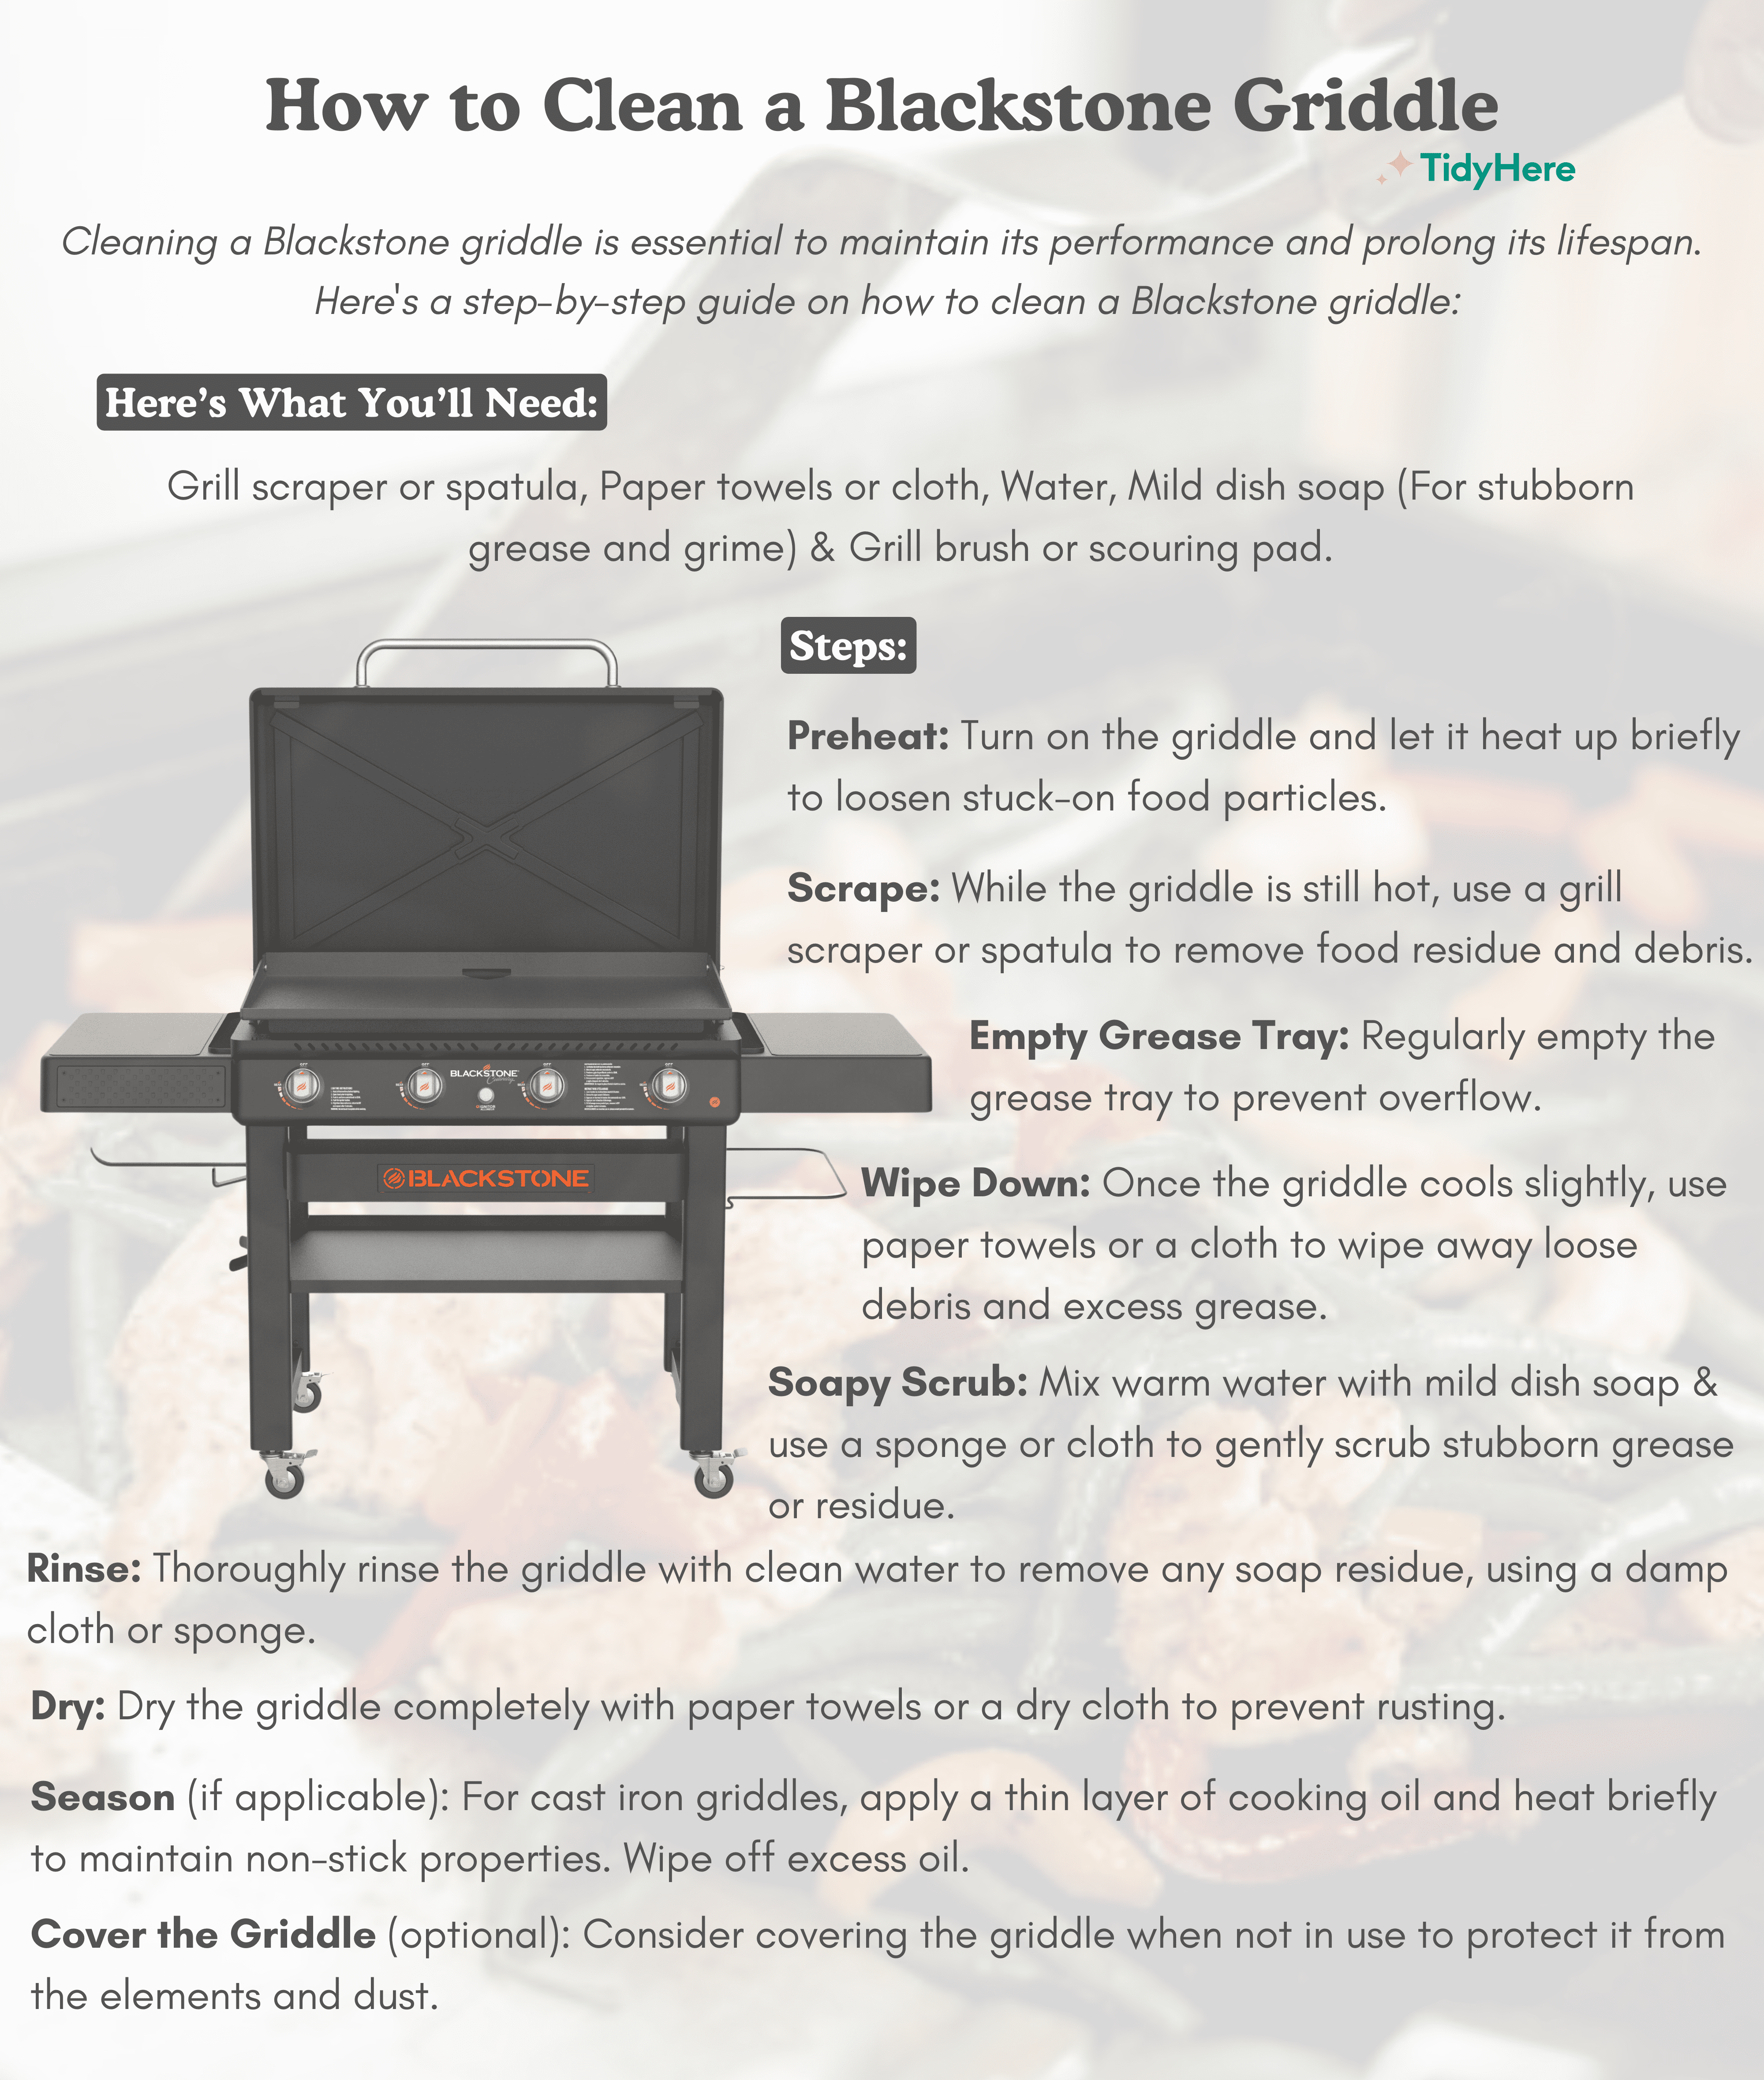 How to Clean a Blackstone Griddle Tidyhere Infographic